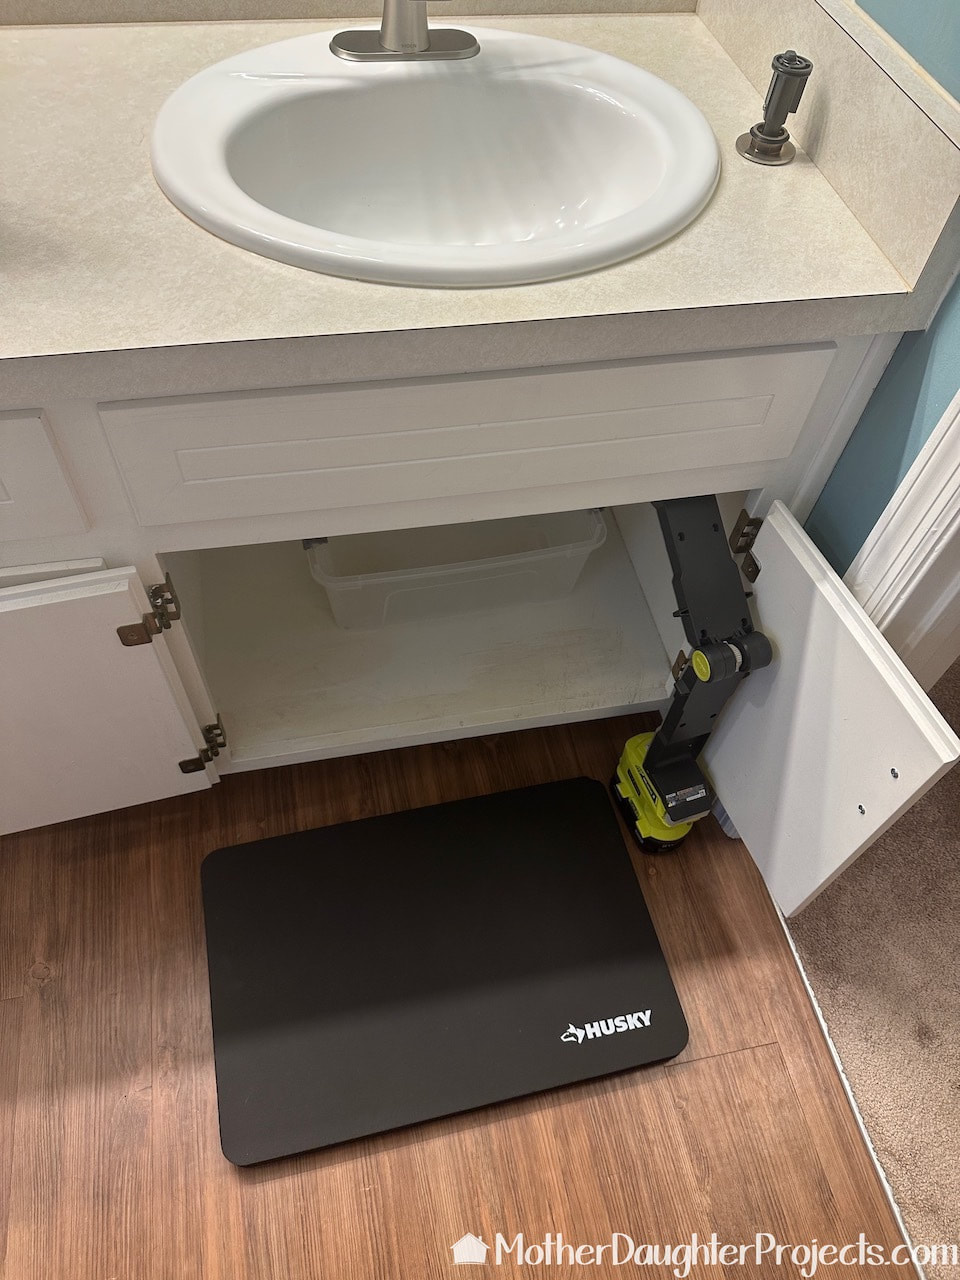 For comfort in installing this Moen Liso sink faucet we are using the Husky 2 soft foam kneeling pad.